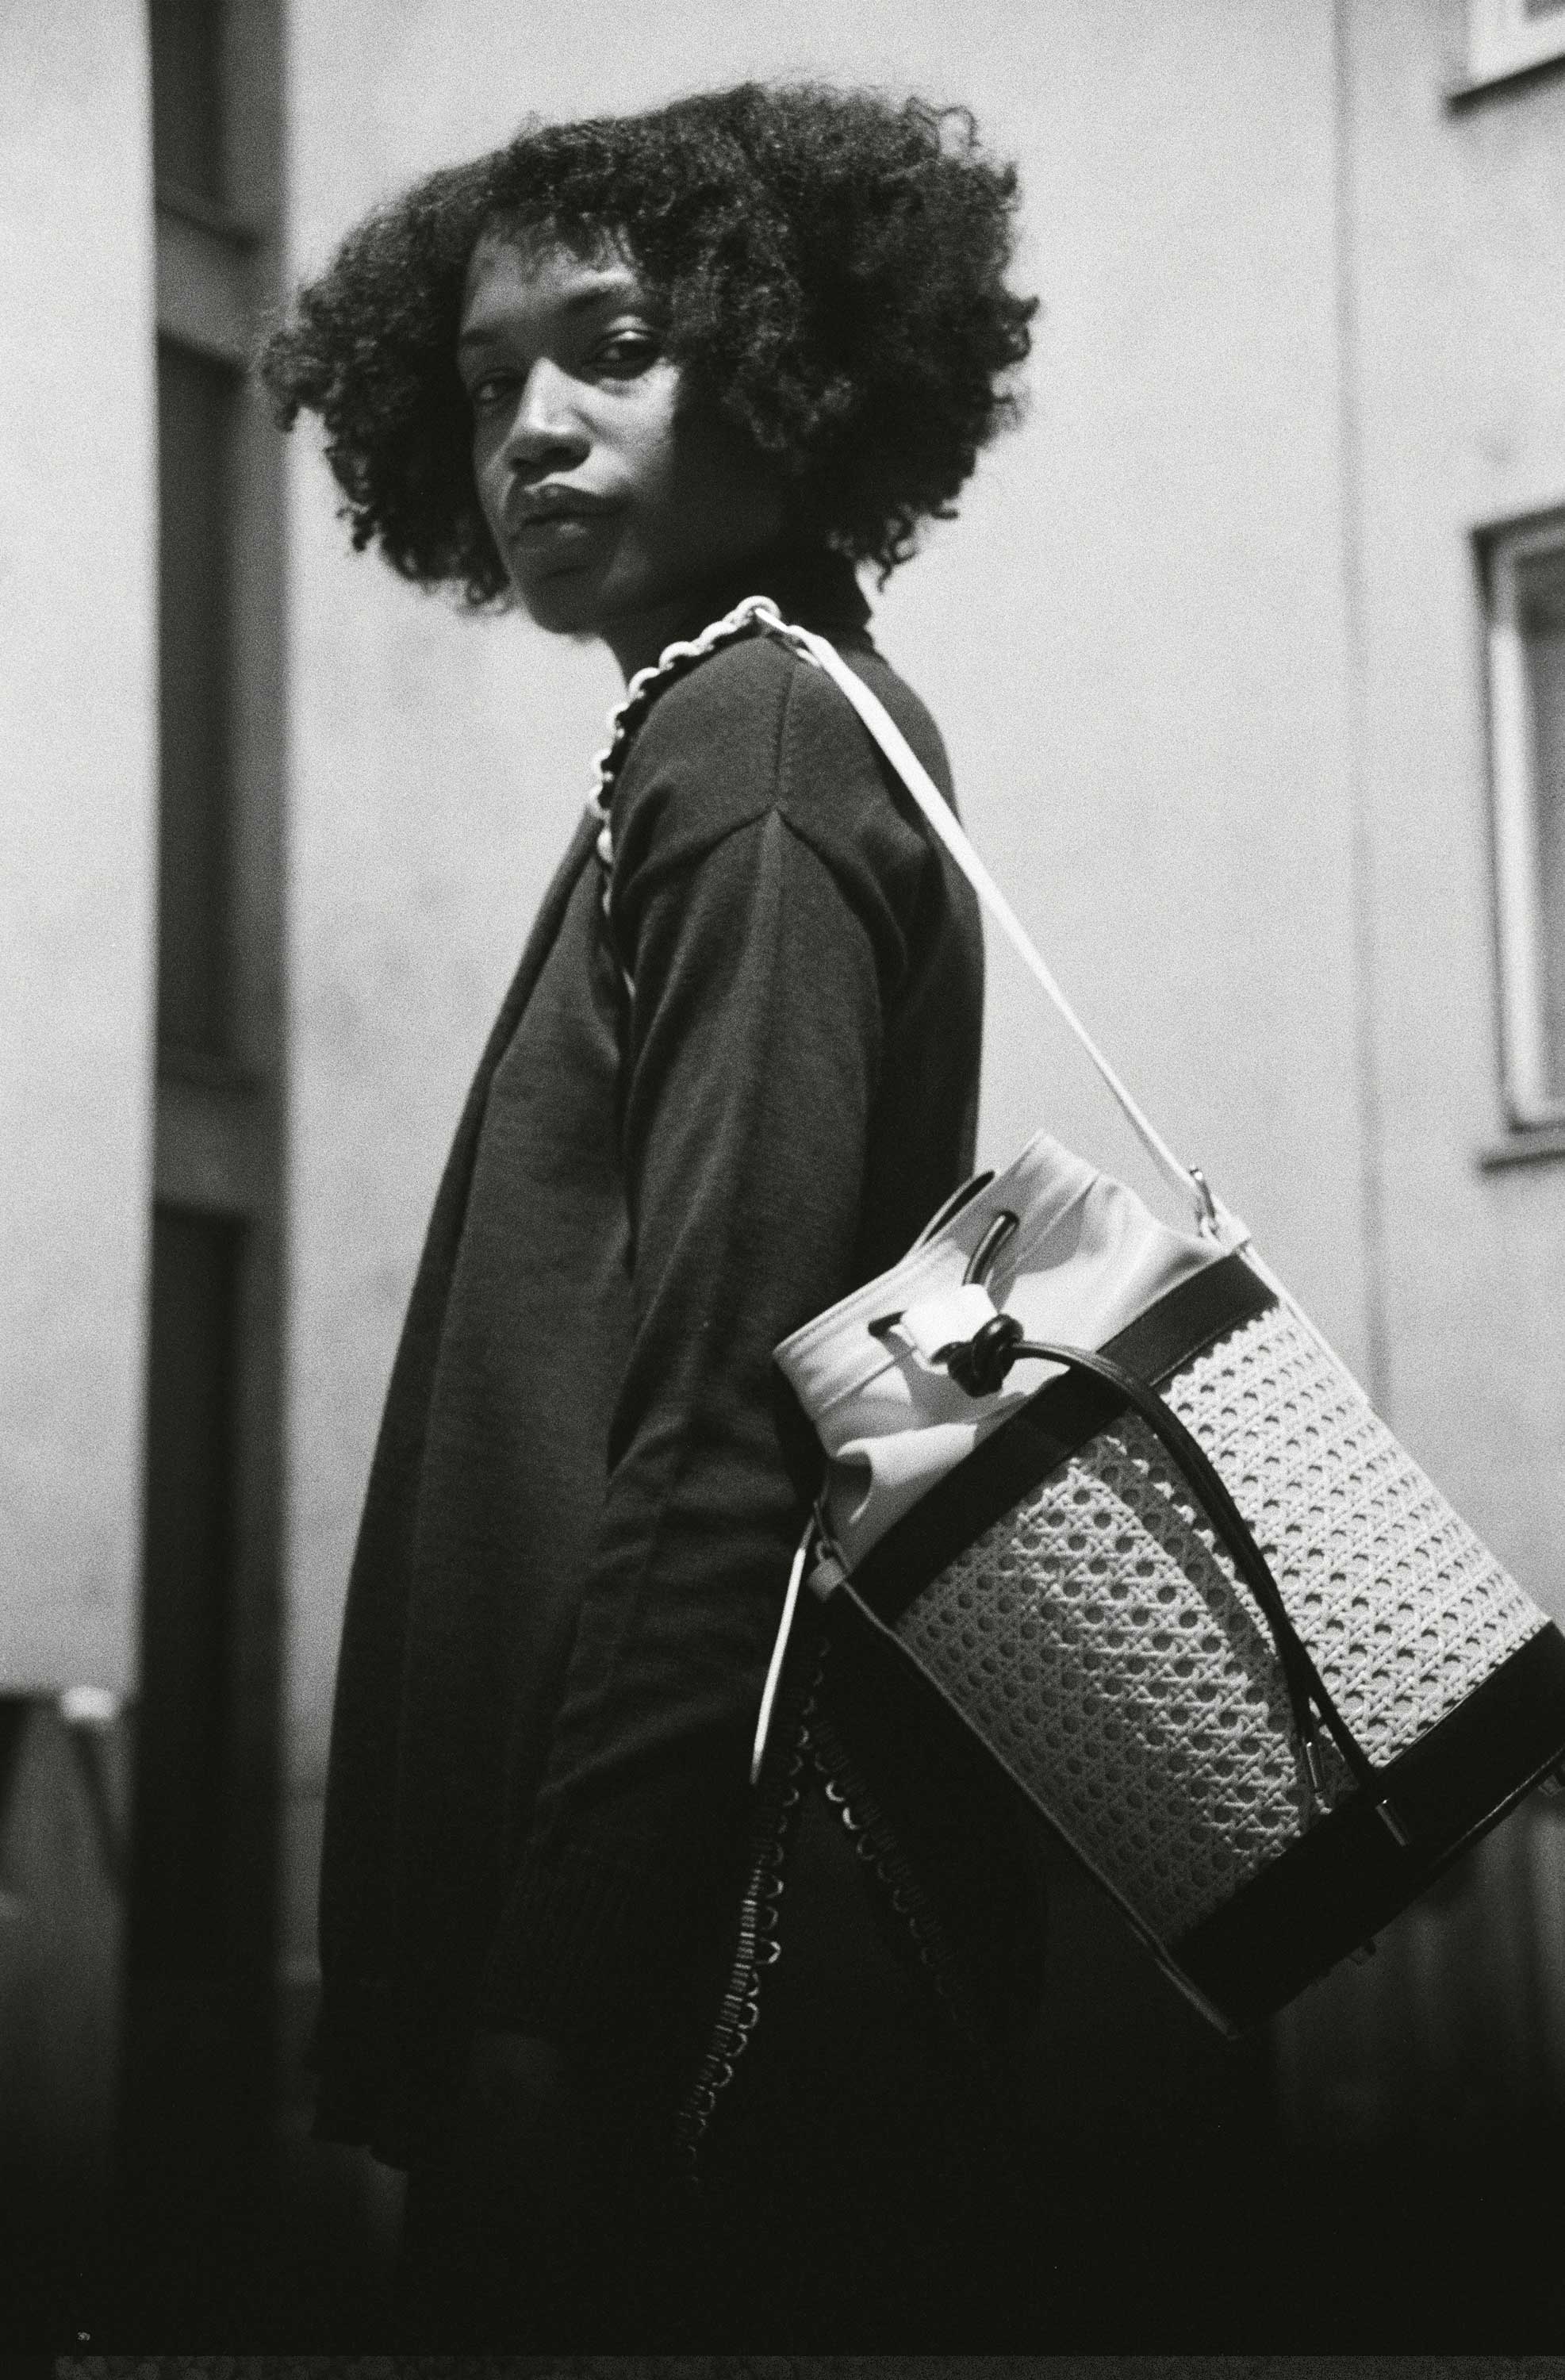 B/W photo. Woman in front of building. Carries handbag around her shoulder.